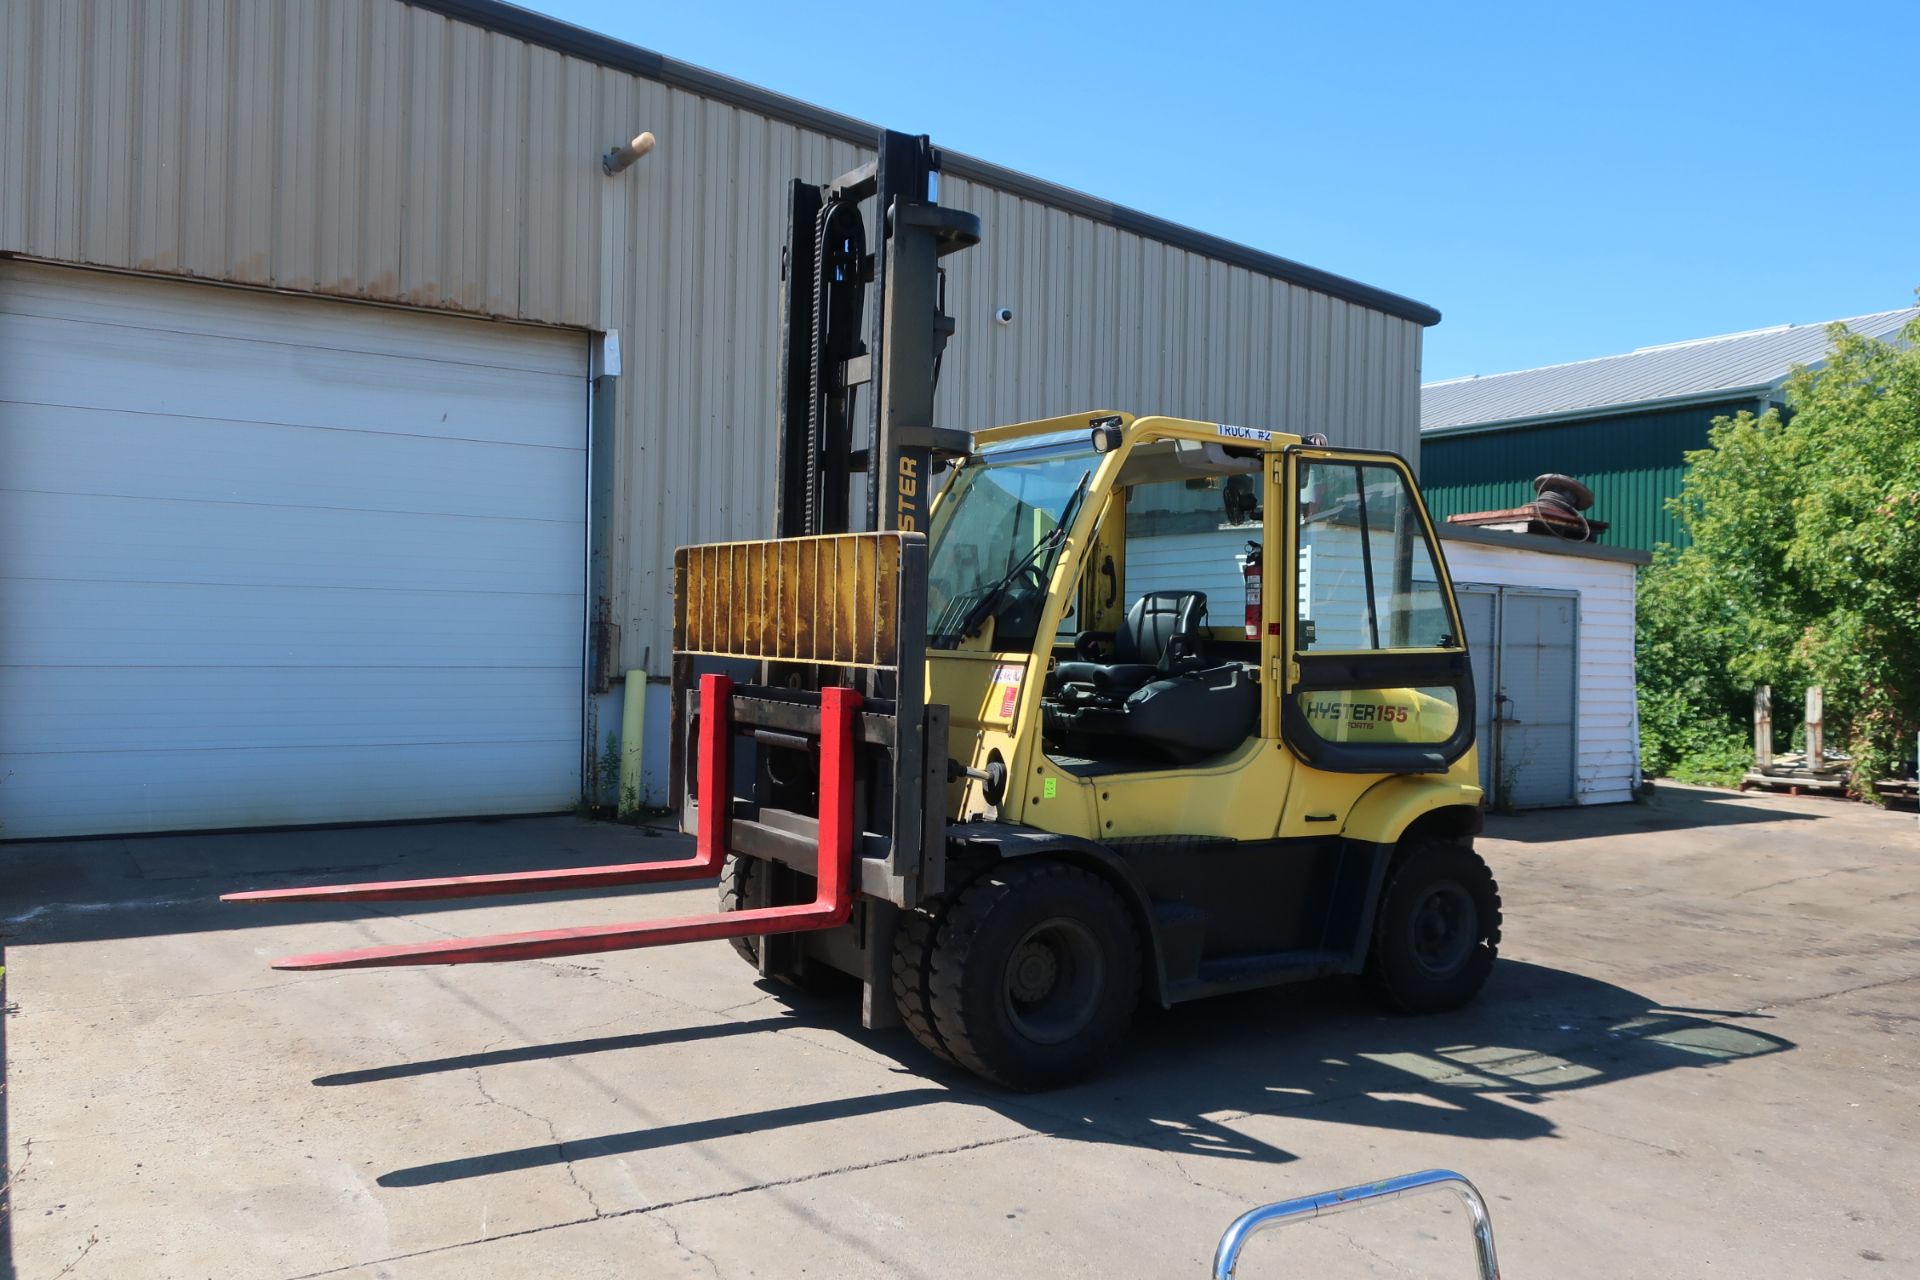 FREE CUSTOMS - MINT 2015 Hyster OUTDOOR 15500lbs Capacity Forklift with 72" - LPG (propane) with